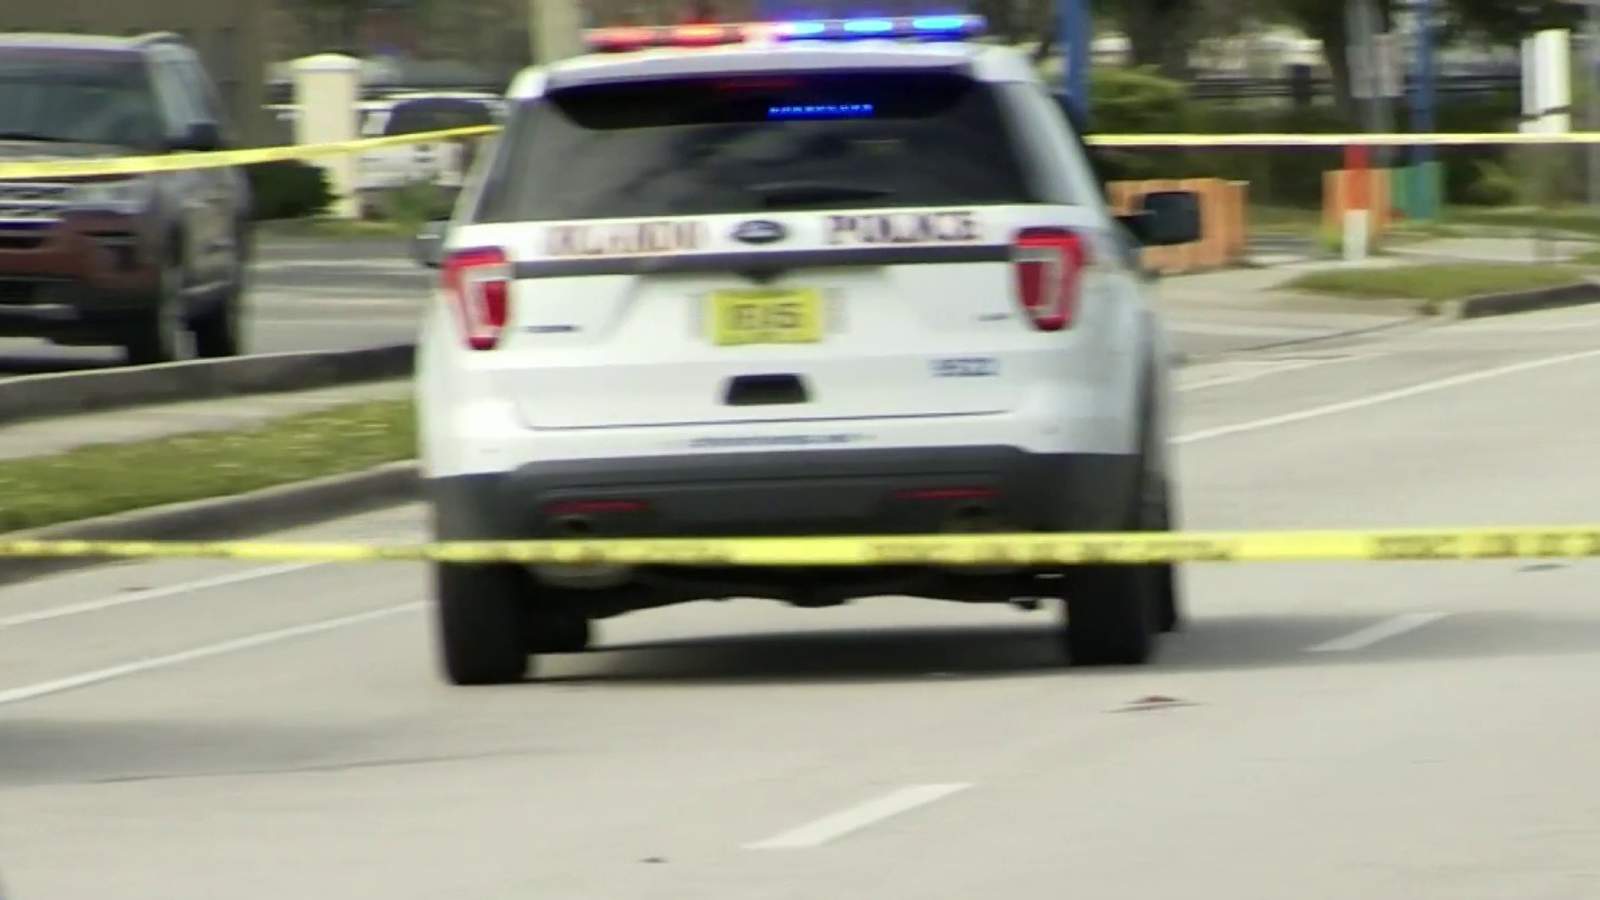 Kidnapping suspect shot by Orlando police officer, chief says